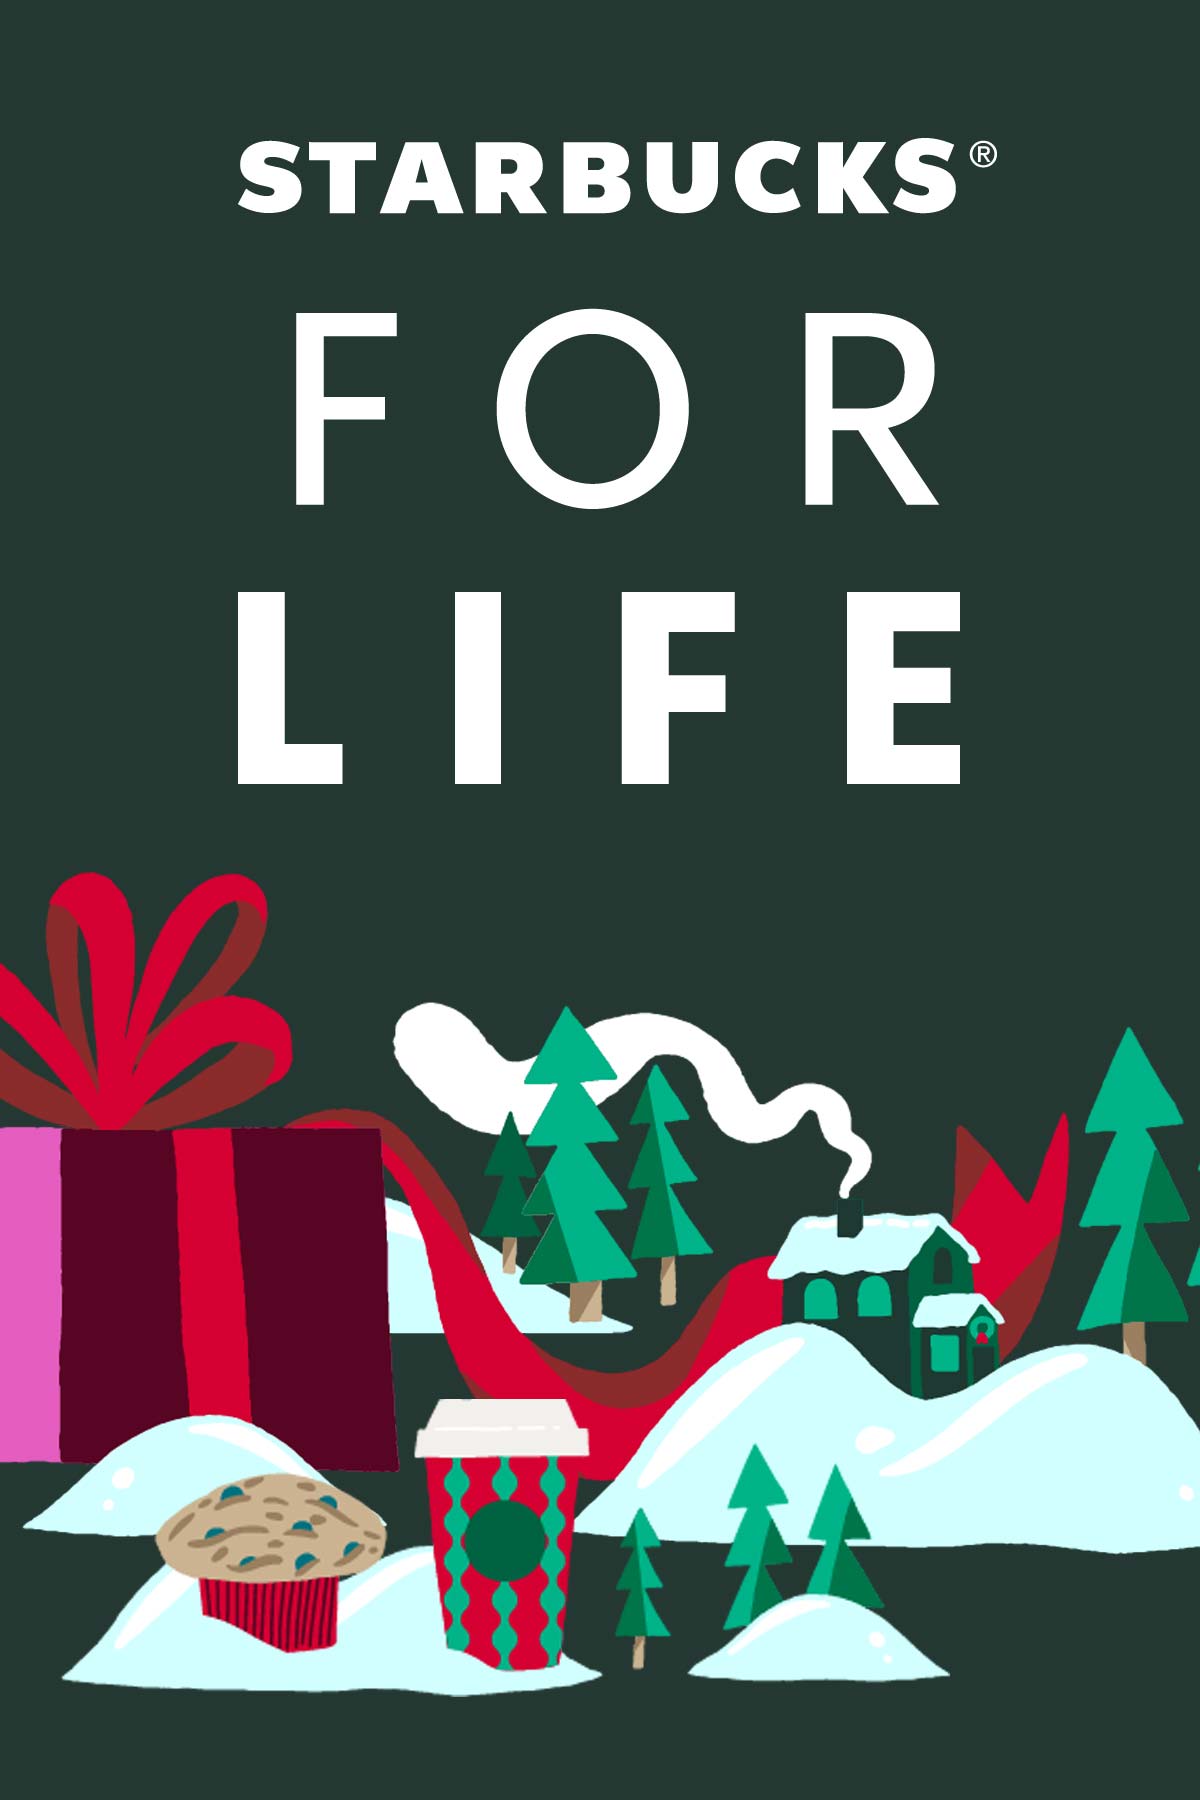 Starbucks for Life text on green background with illustrated gift, trees, and snow.